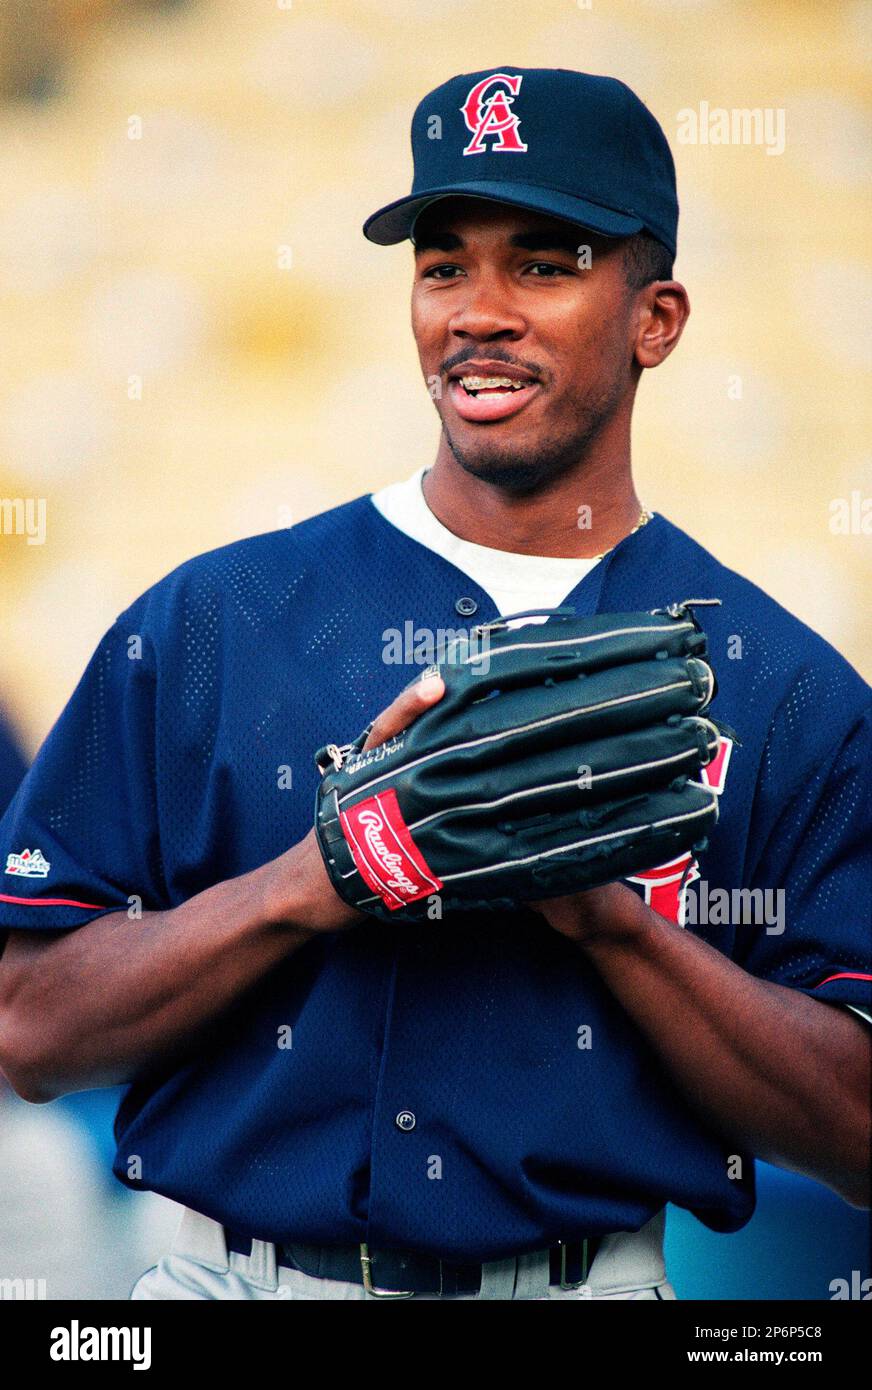 Garret Anderson of the Anaheim Angels during a game at Anaheim Stadium in  Anaheim, California during the 1997 season.(Larry Goren/Four Seam Images  via AP Images Stock Photo - Alamy